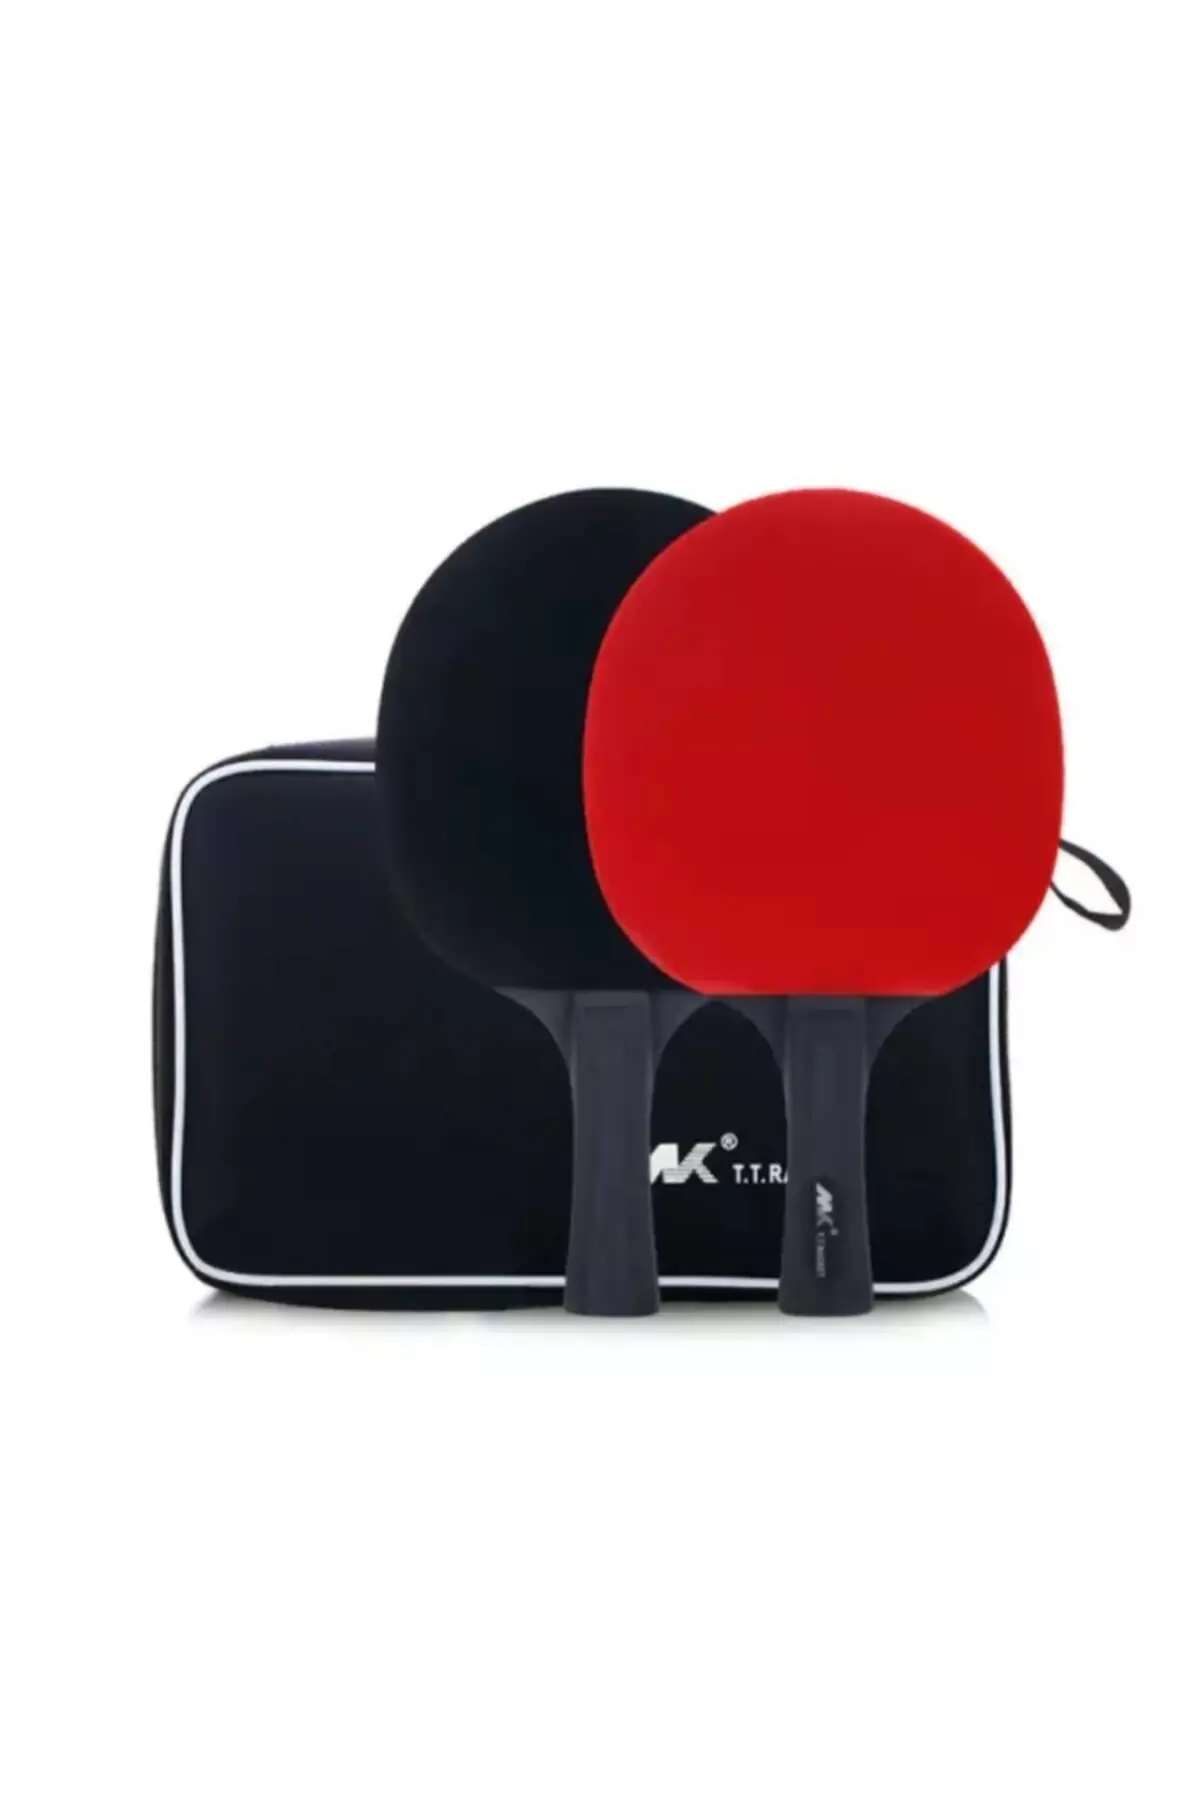 Mvk Table Tennis Racket Set Bag And Ball Gift Tennis Equipment & Accessory Outdoor